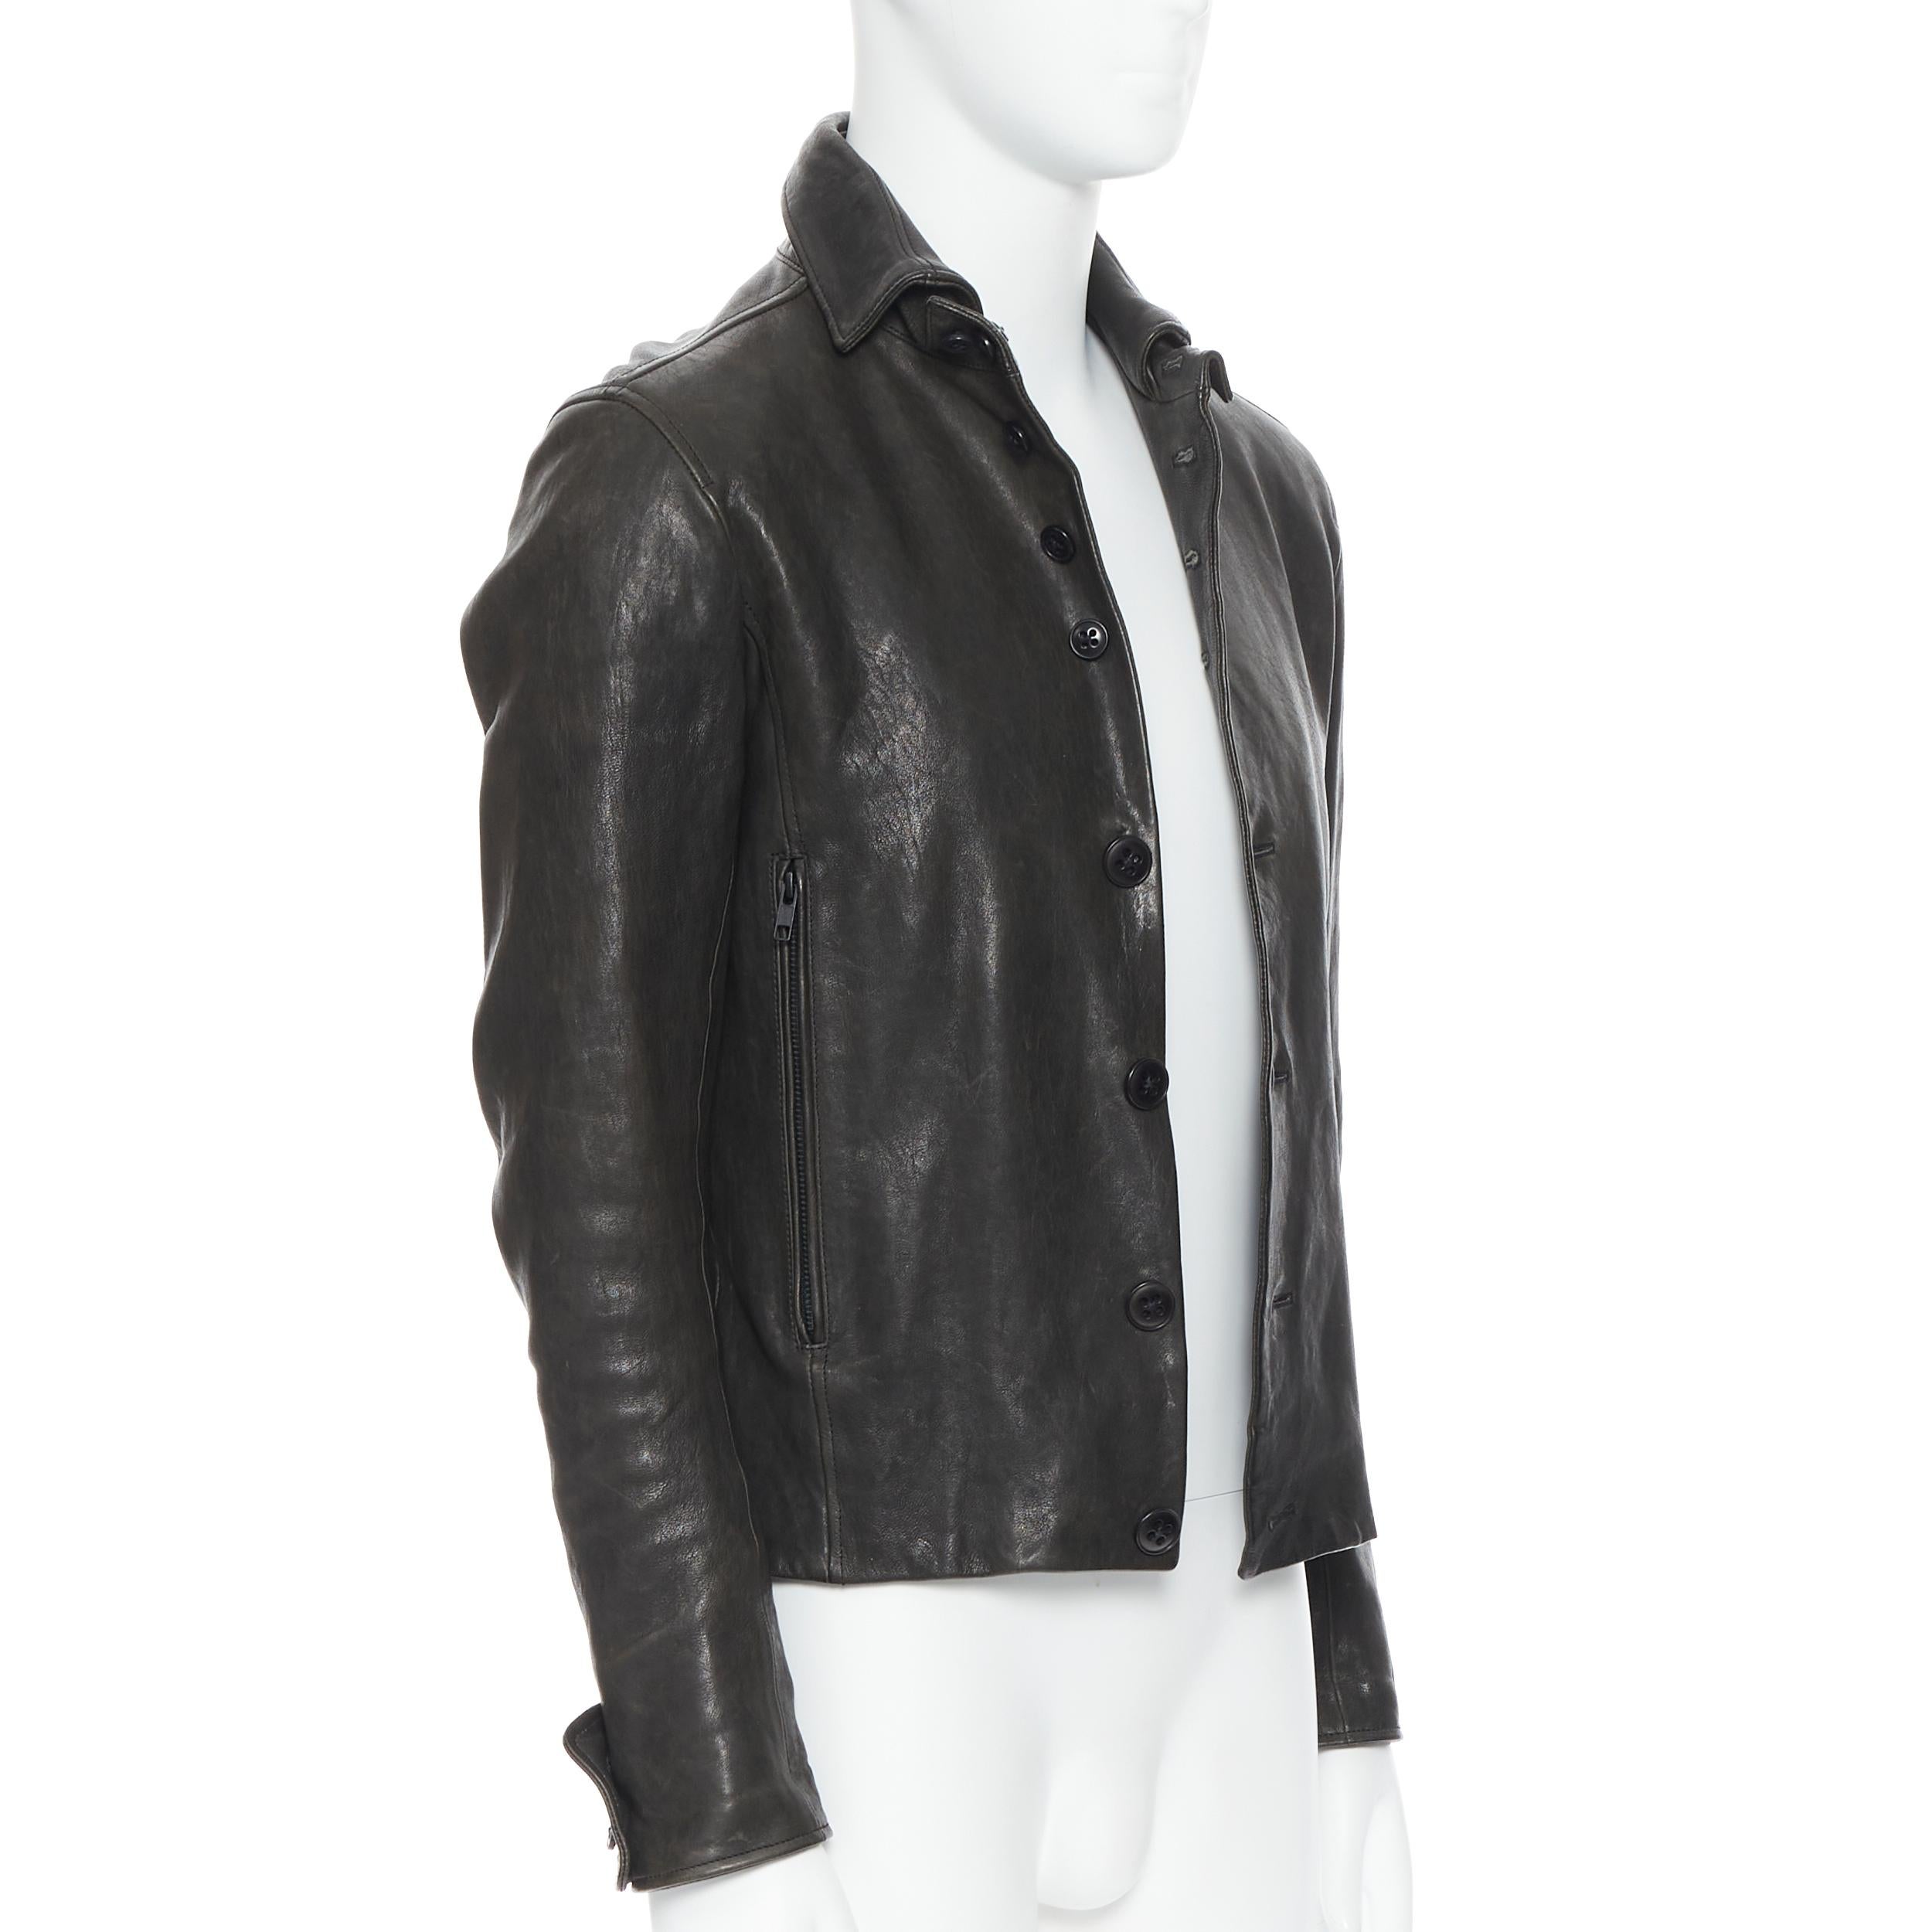 ANN DEMEULEMEESTER black leather dual collar button front fitted jacket XS Reference: PRCN/A00048 Brand: Ann Demeulemeester Material: Leather Color: Black Pattern: Solid Closure: Button Extra Detail: Genuine leather. Layered collar design. Button